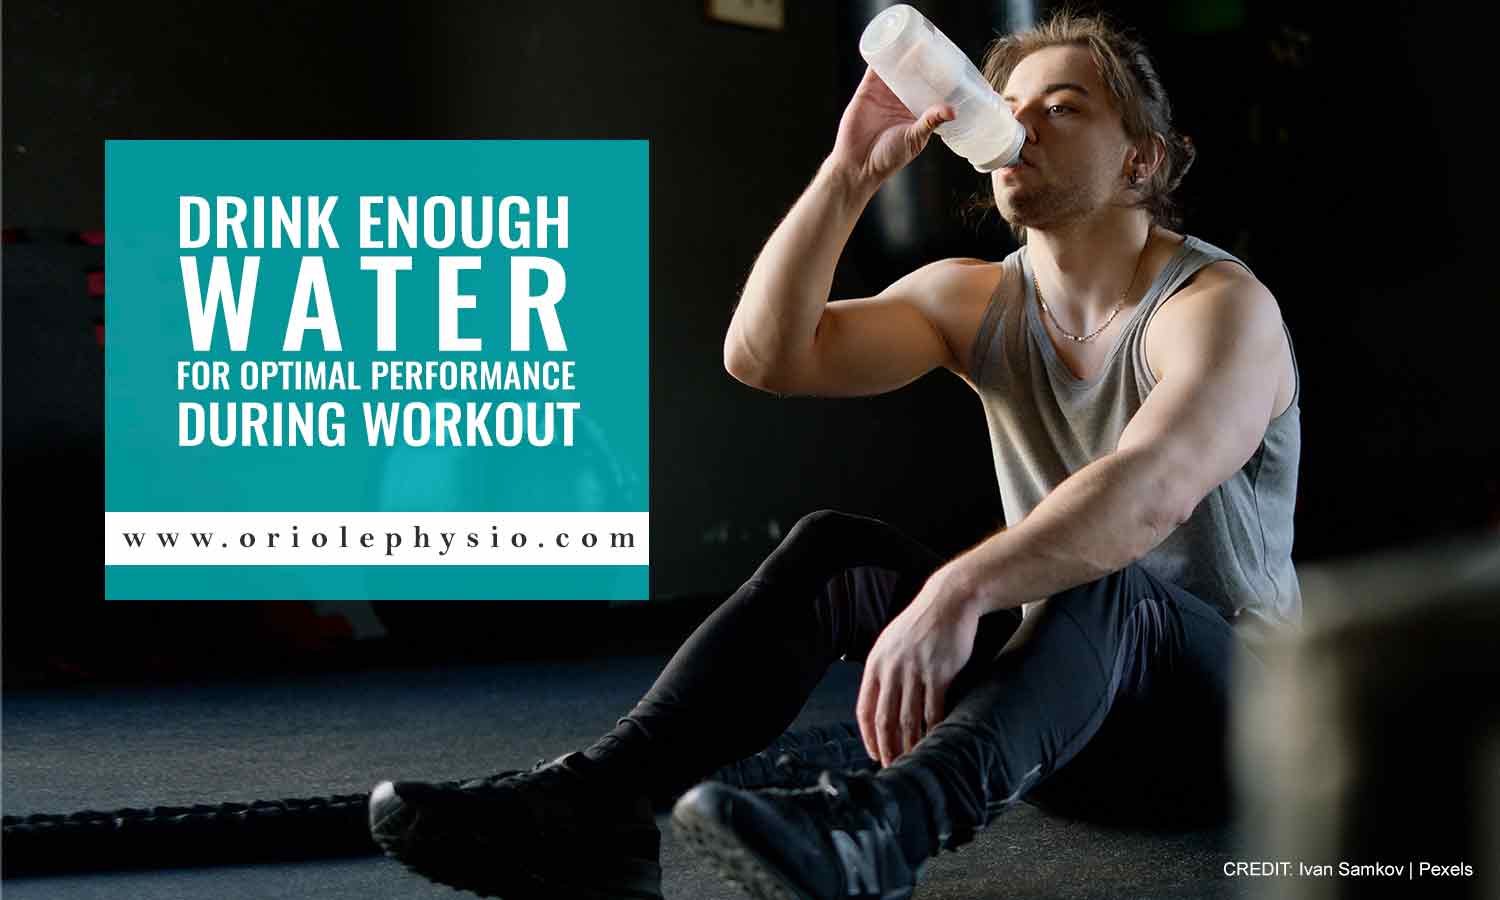 Drink enough water for optimal performance during workout